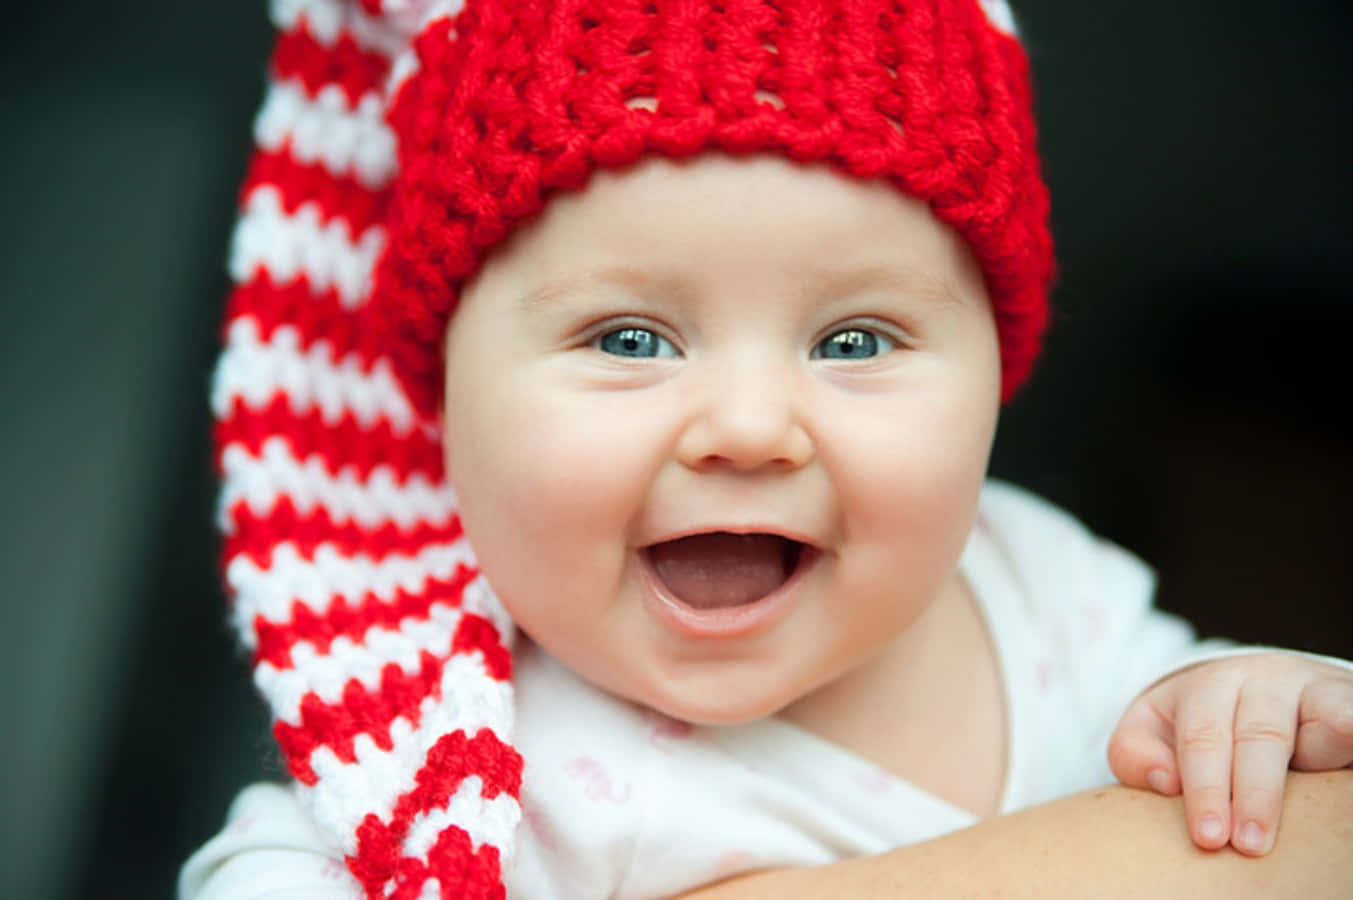 100+] Baby Smile Pictures | Wallpapers.com